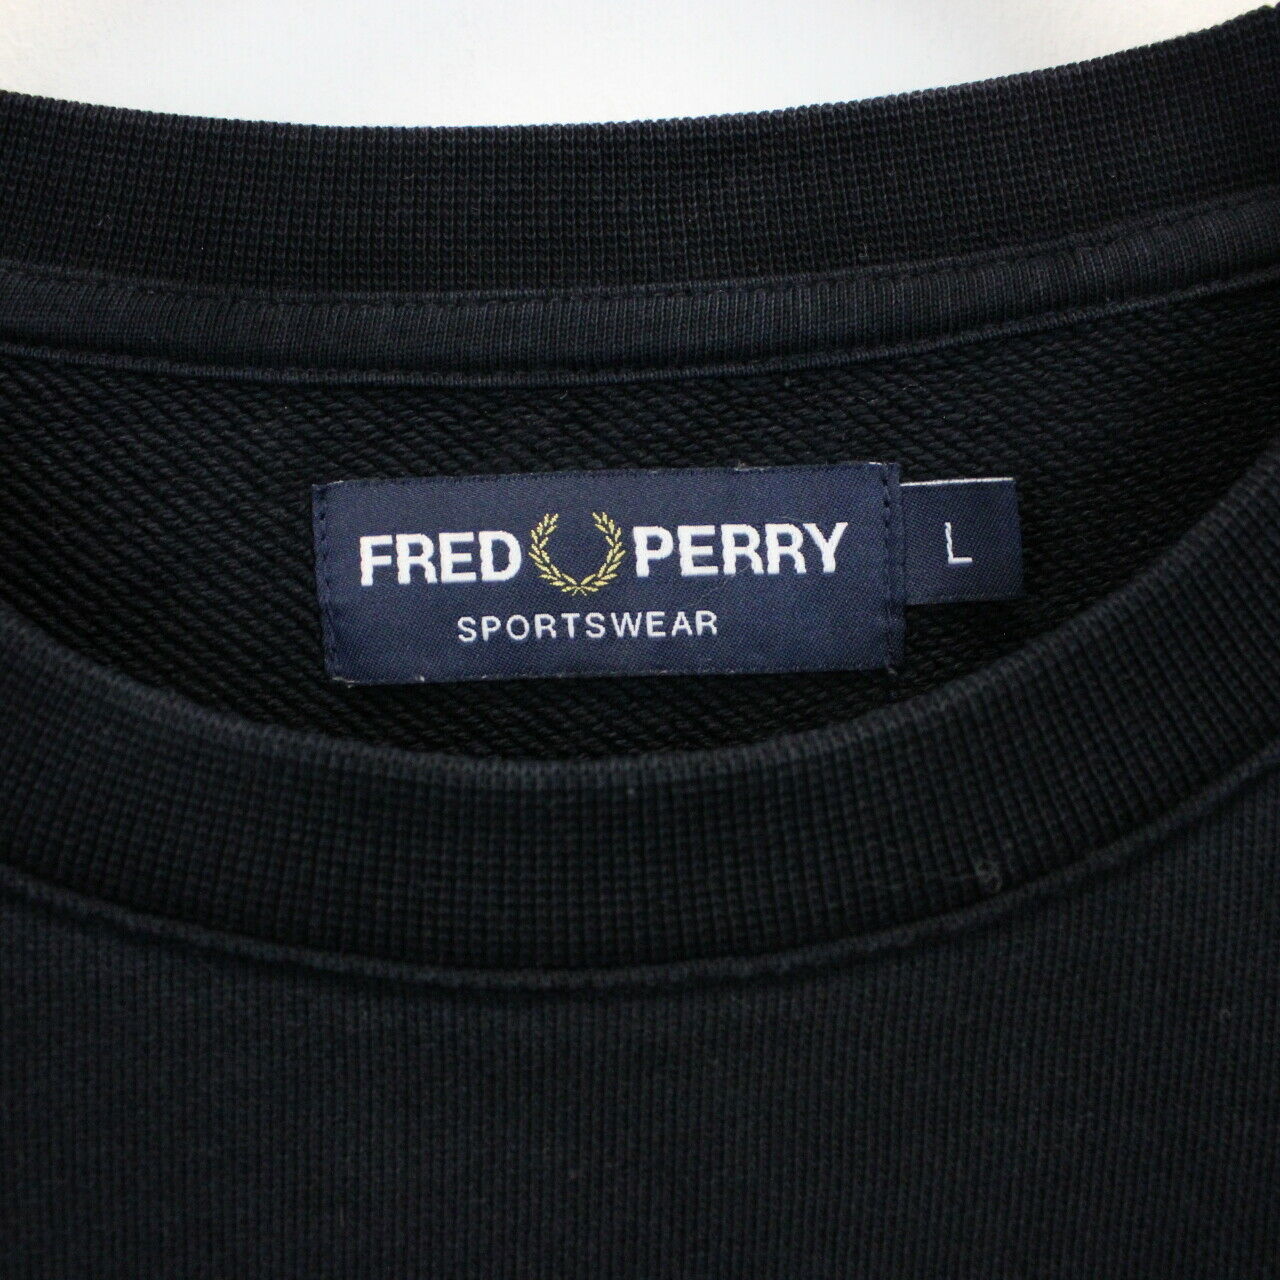 FRED PERRY Sweatshirt Navy Blue | Large